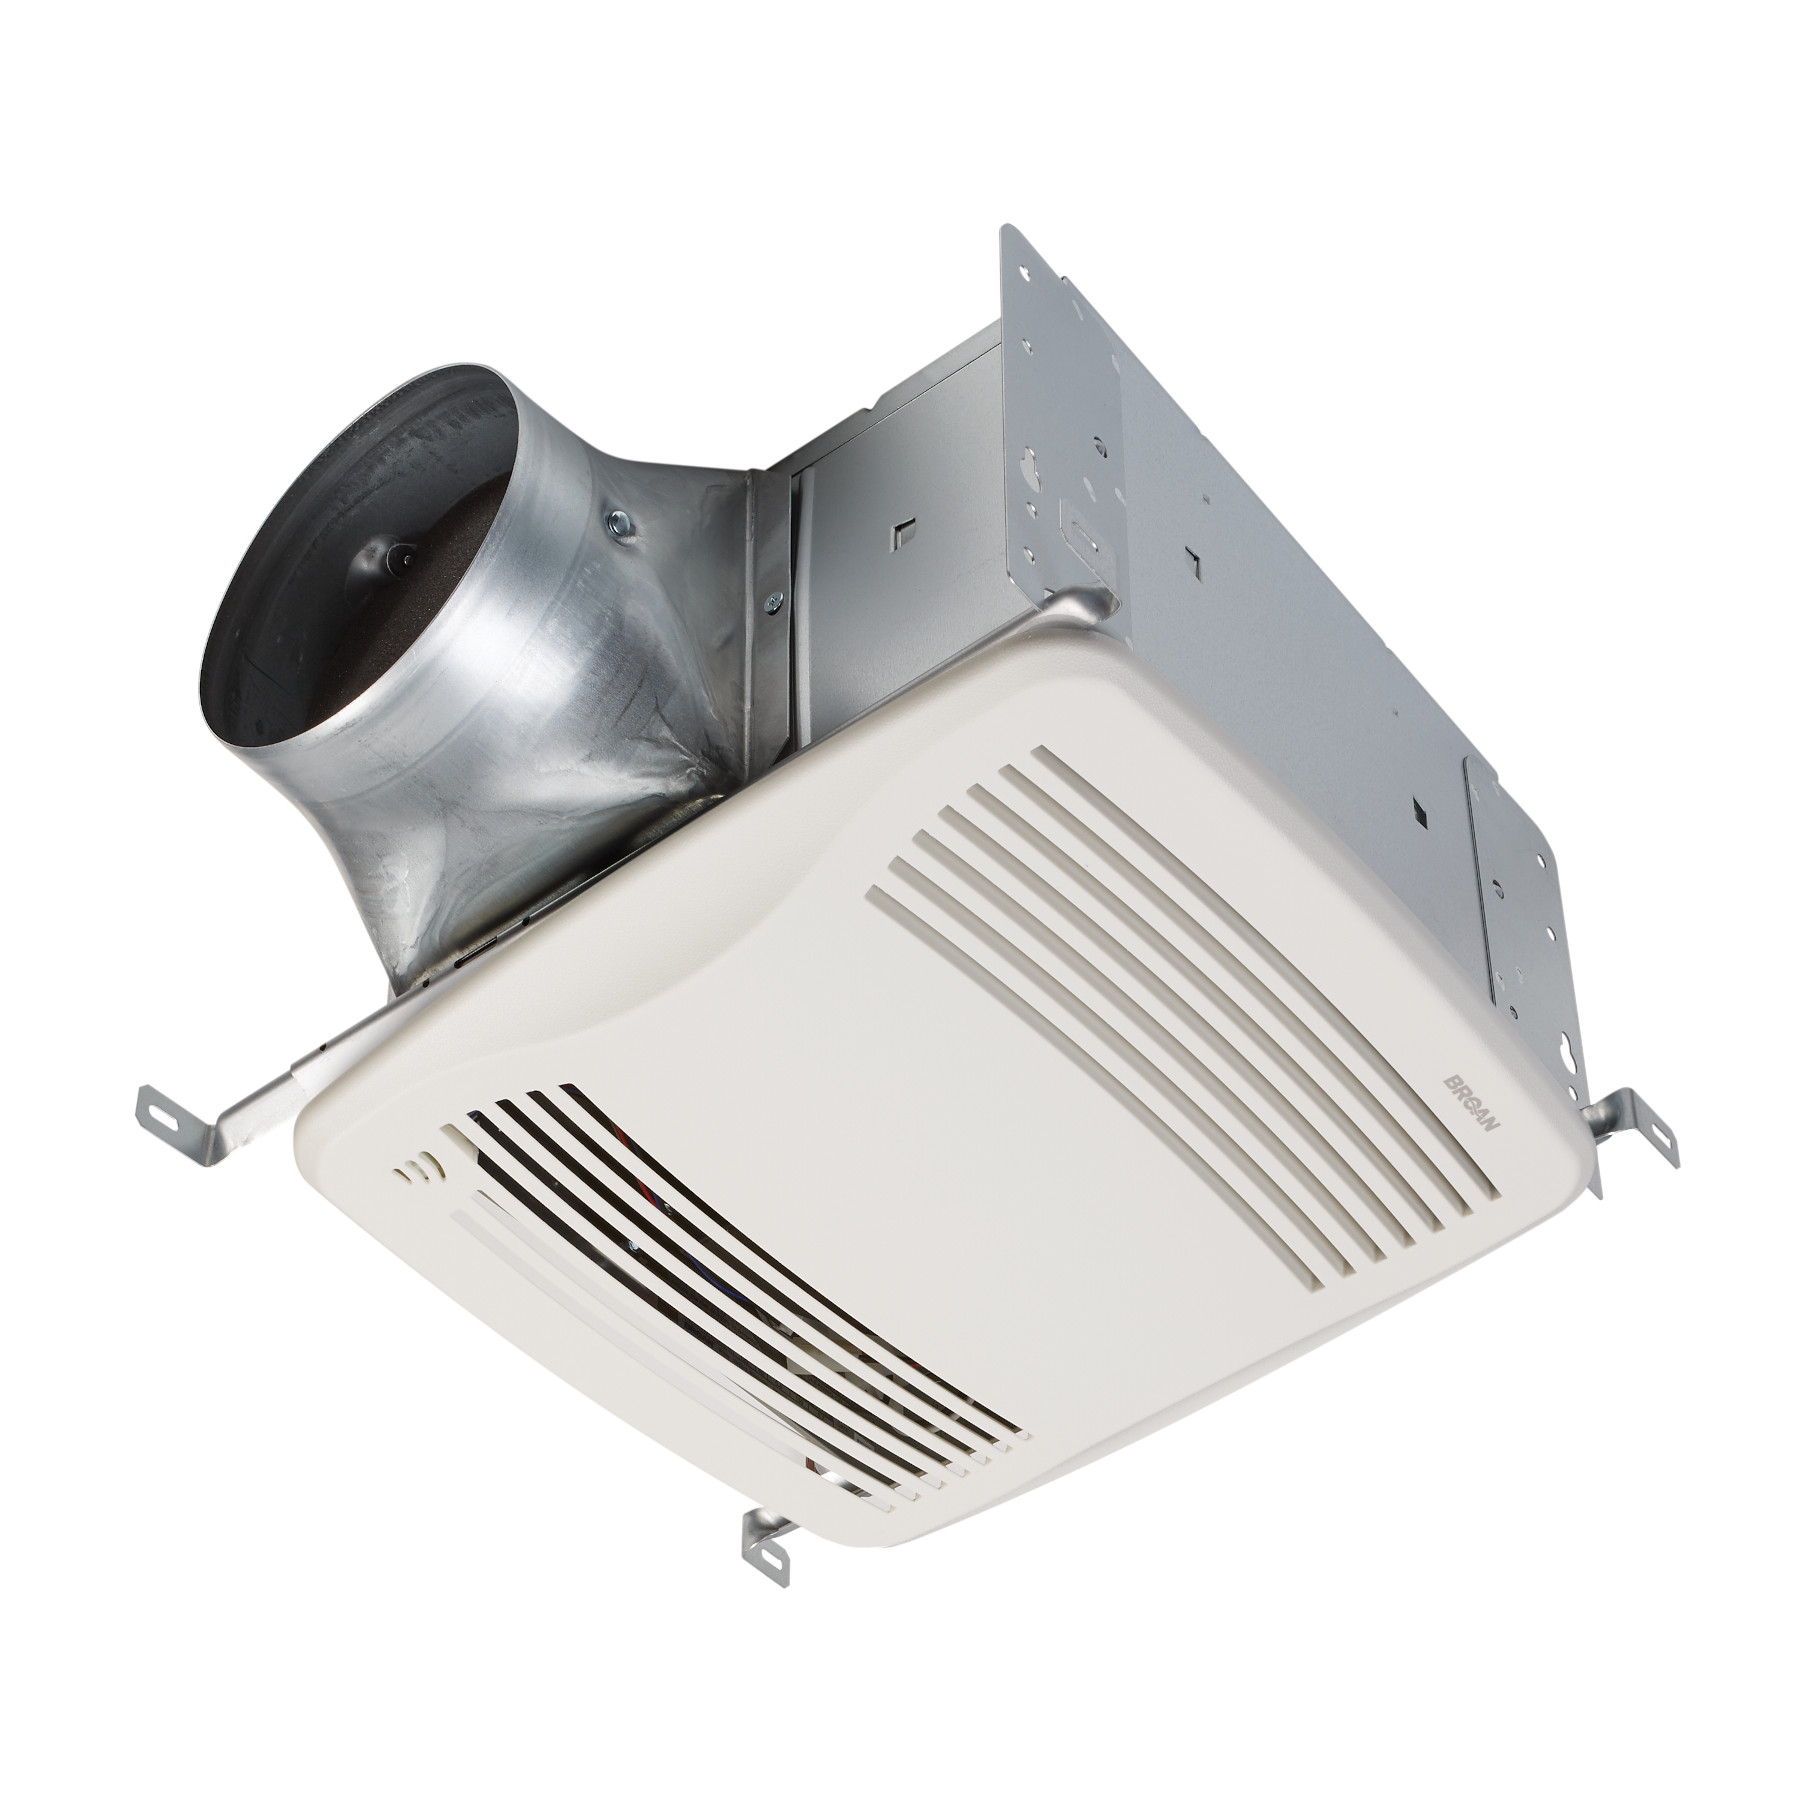 Humidity Motion Sensing Fans, Best Bathroom Exhaust Fan With Light And Humidity Sensor